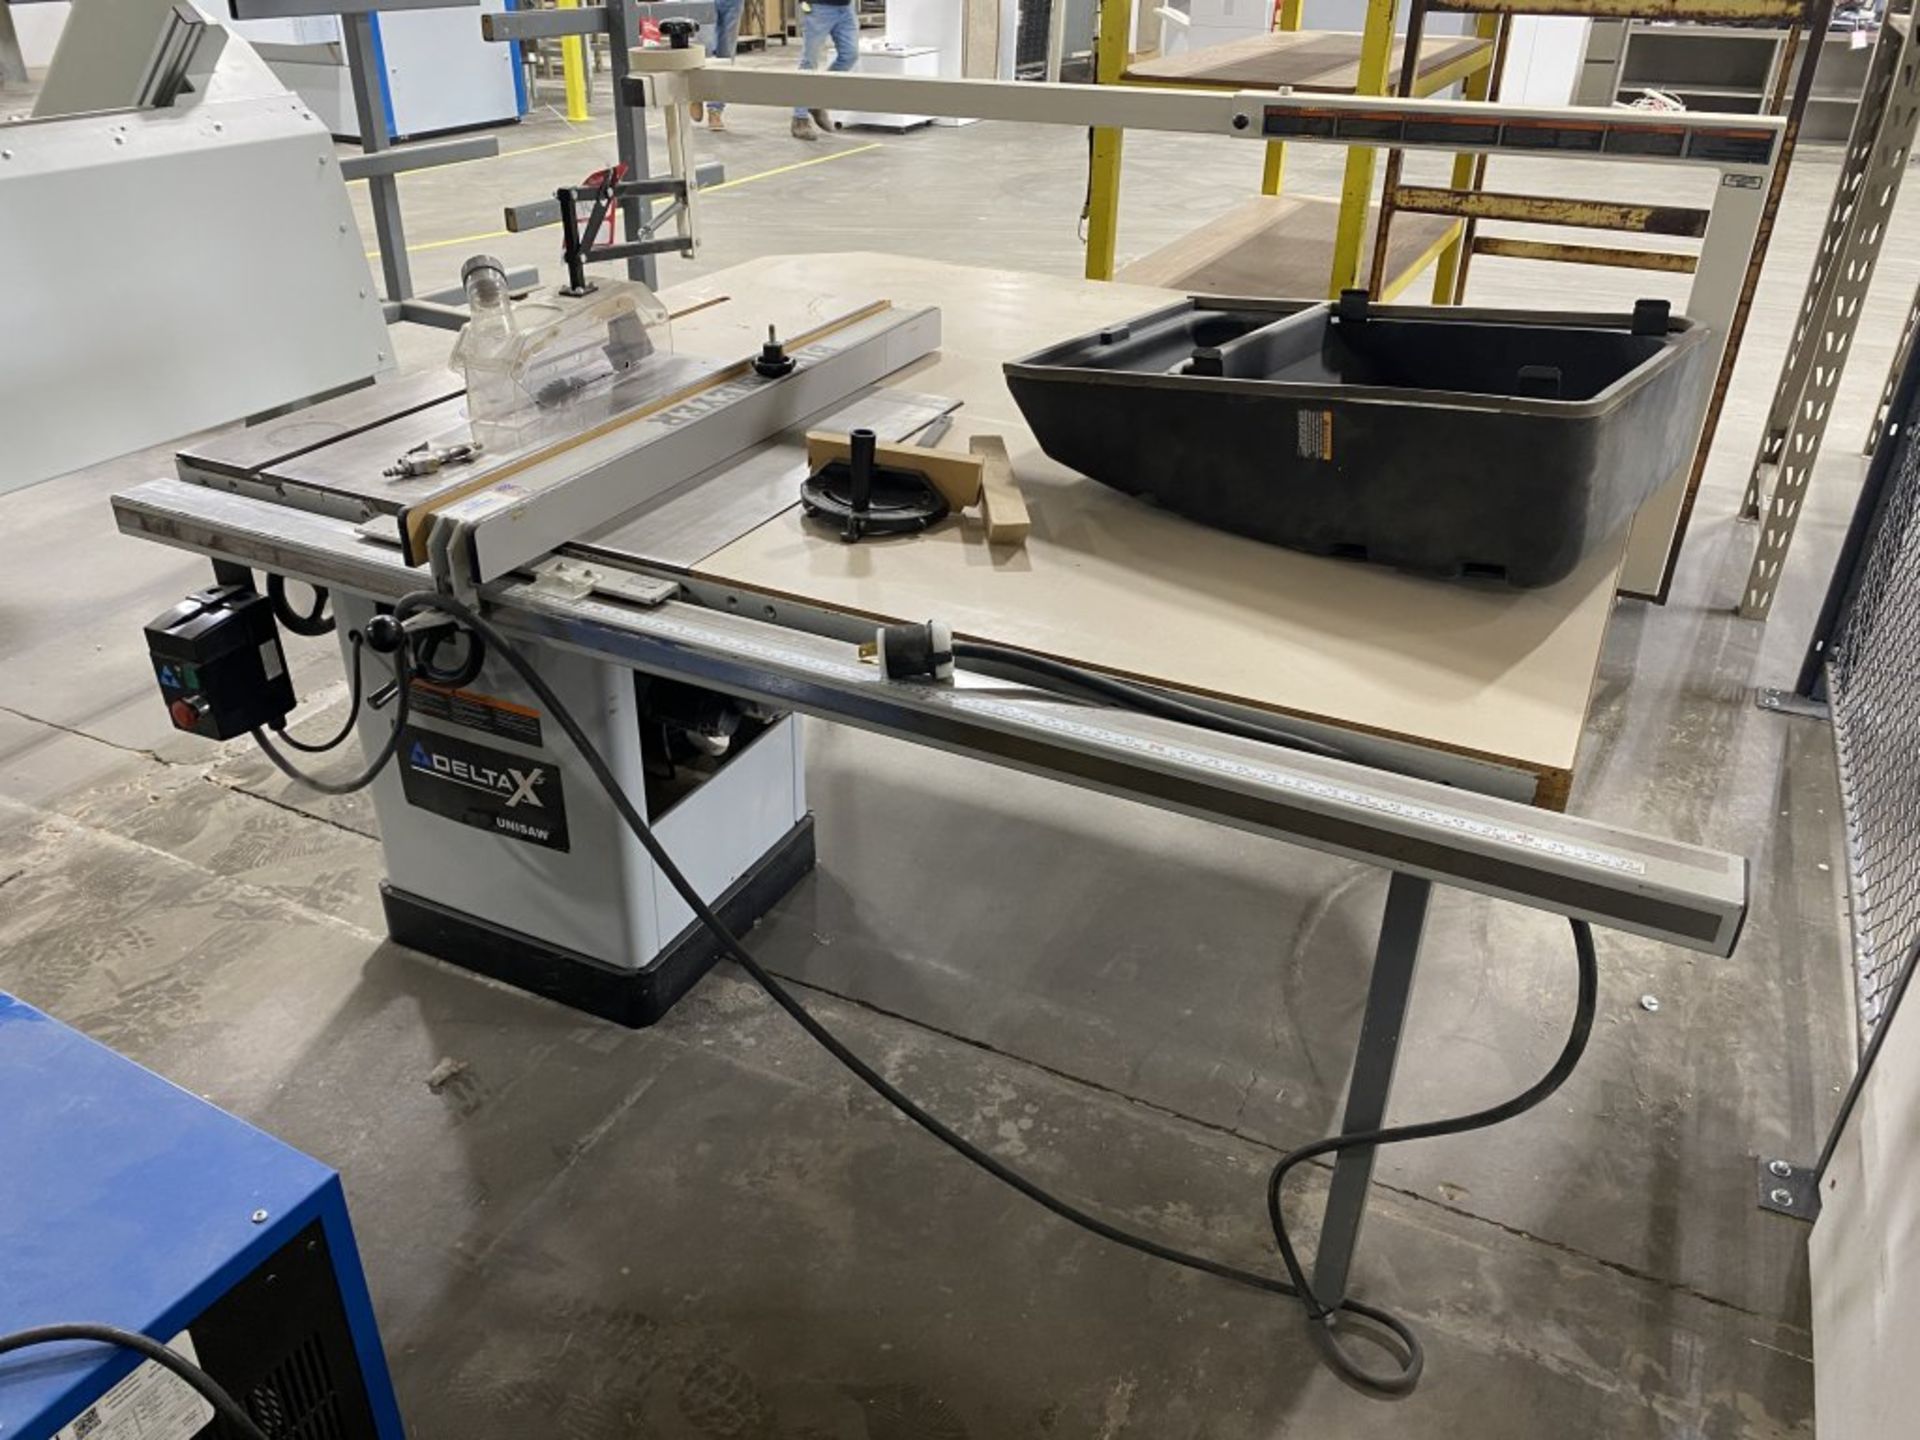 DELTA X5 UNISAW TABLE SAW, SINGLE PHASE, WITH EXTENSION, S/N: 05H108224 - Image 2 of 9